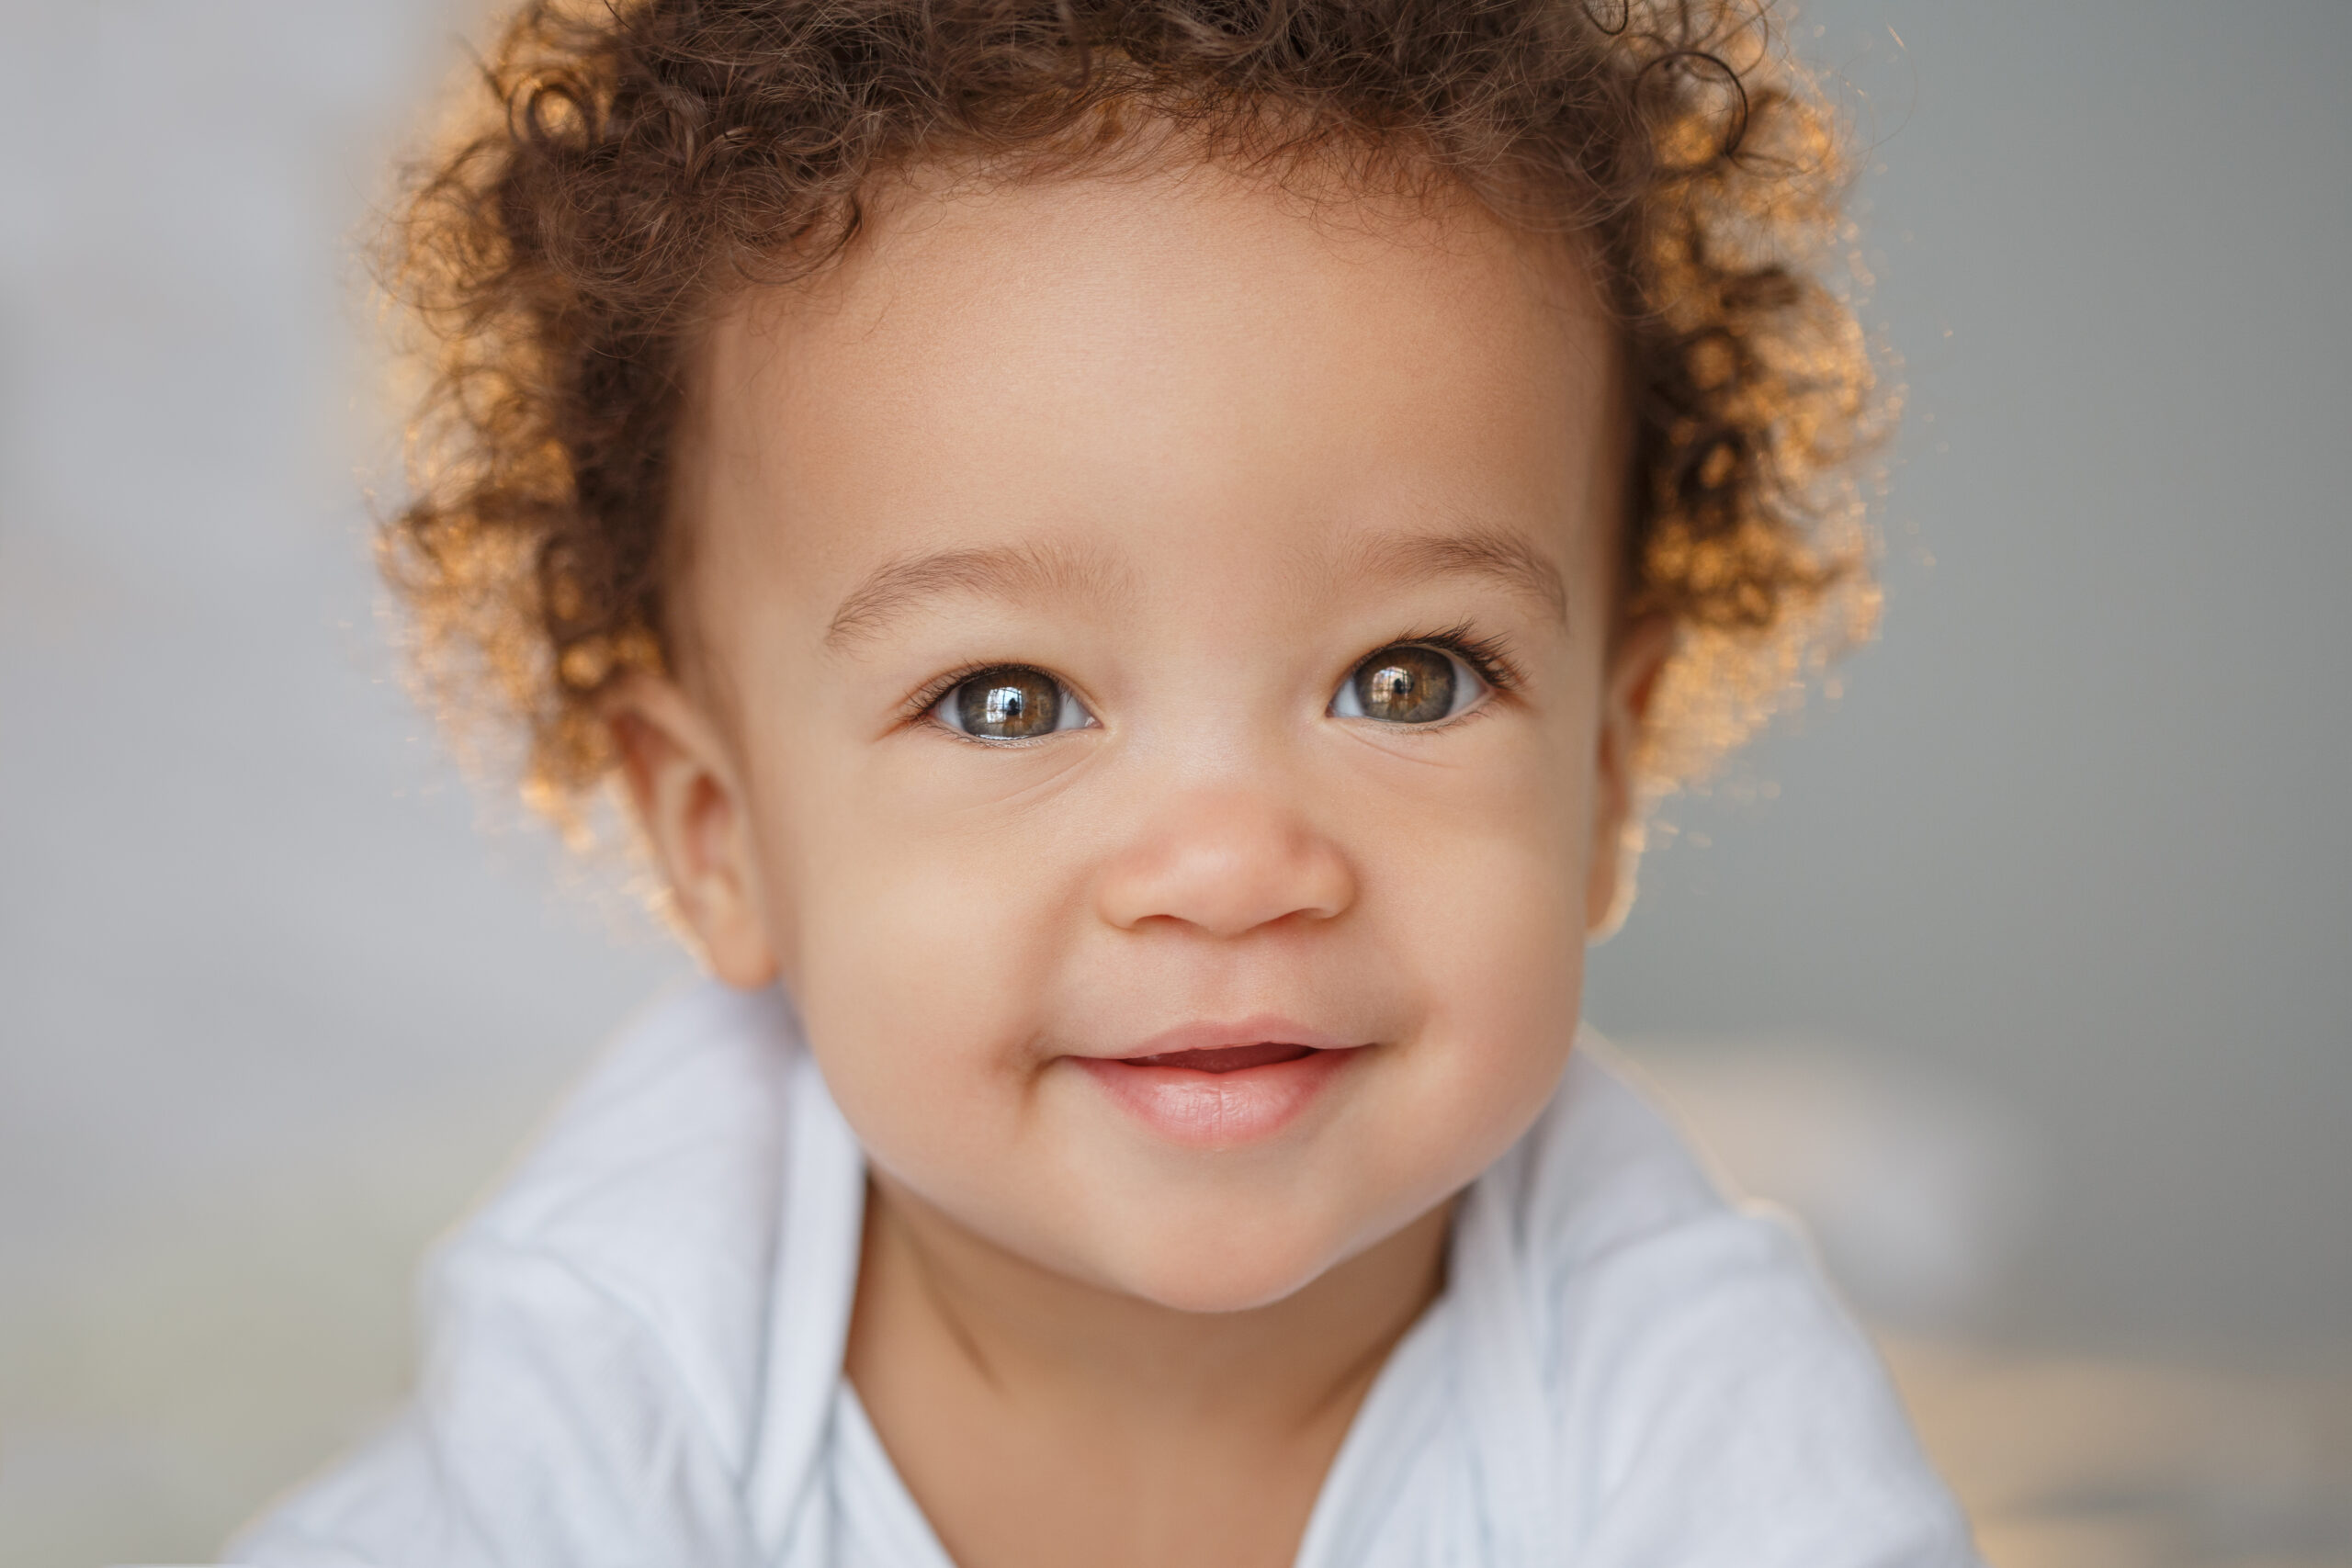 Headshot of baby with curly hair